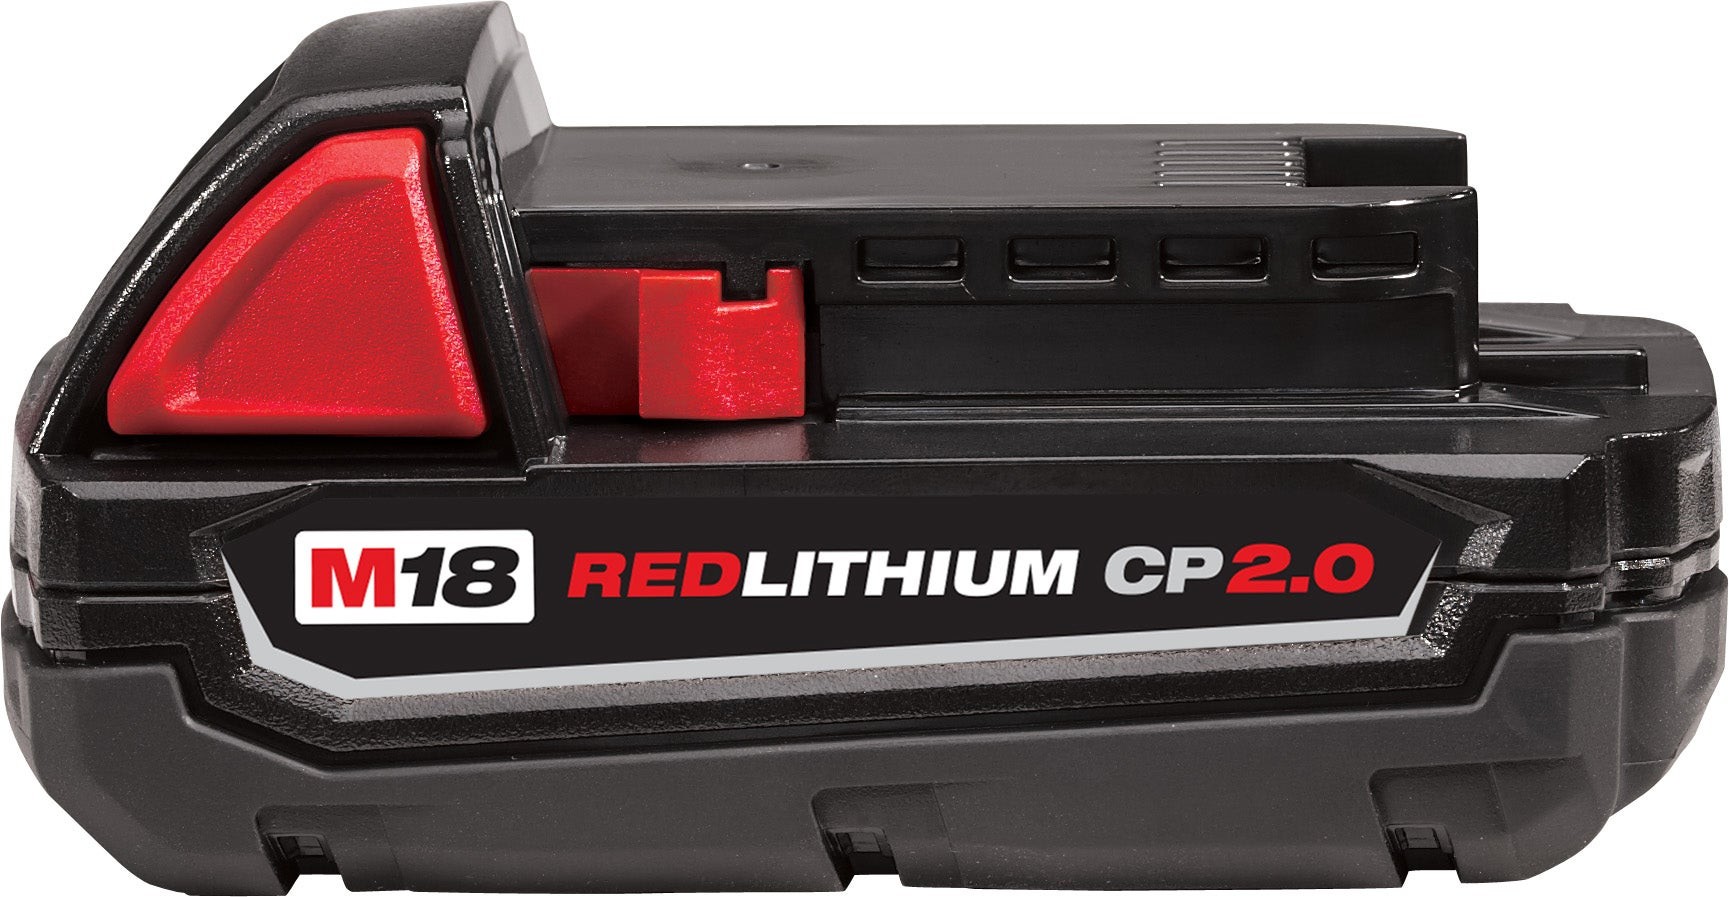 M18 REDLITHIUM CP2.0 Battery Pack